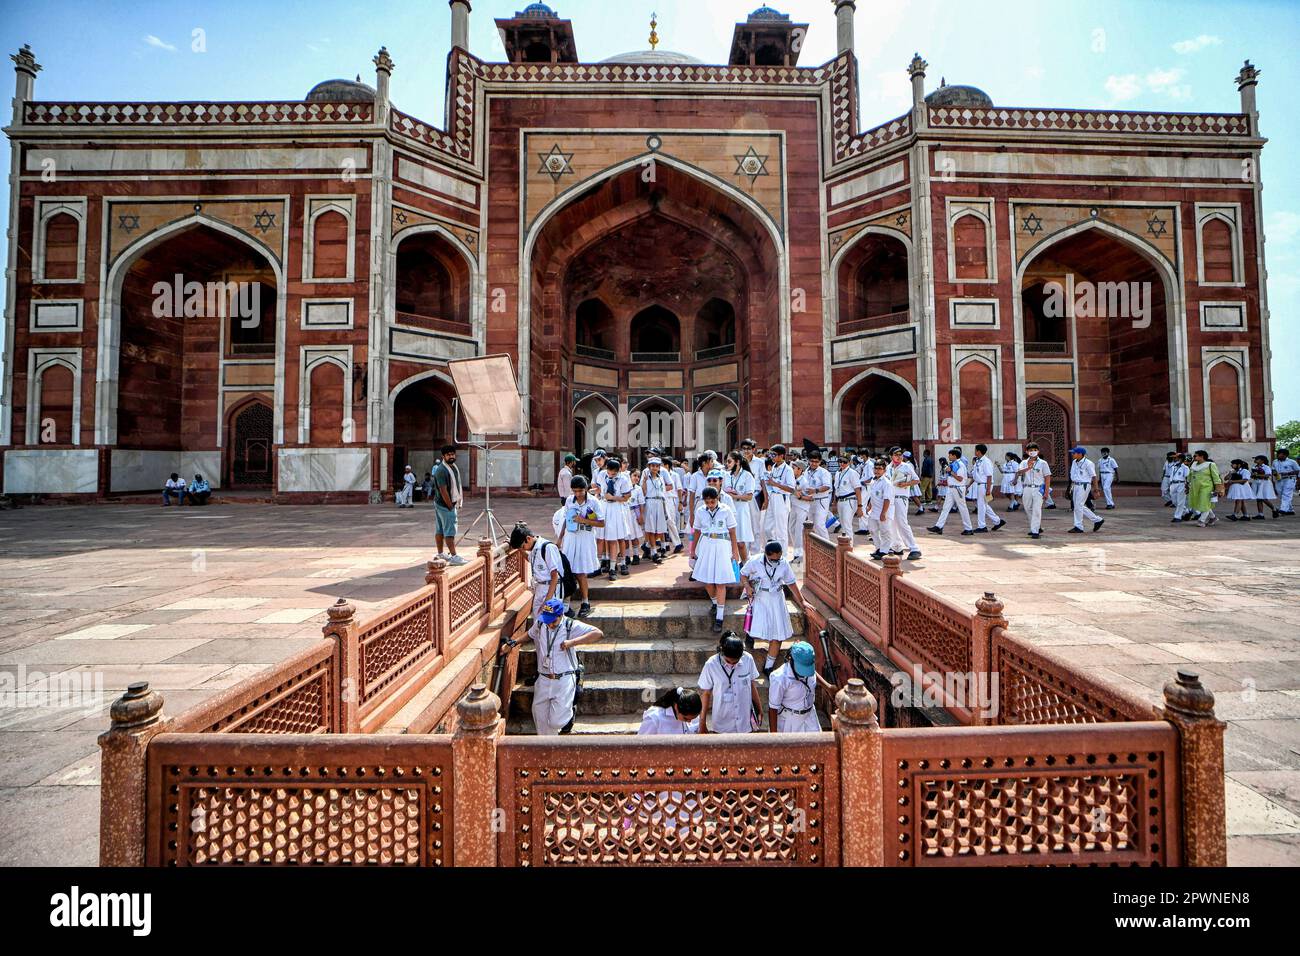 School students seen on an Educational tour at the Humayun Tomb in New Delhi. Humayun’s Tomb is a grand dynastic mausoleum that was to become synonyms of Mughal architecture. The mausoleum was completed in the year 1570 and contains the tombs of Emperor Humayun as well Bega Begum, Hamida Begum, and Dara Shikoh. The tomb was the first garden-tomb on the Indian subcontinent. Stock Photo